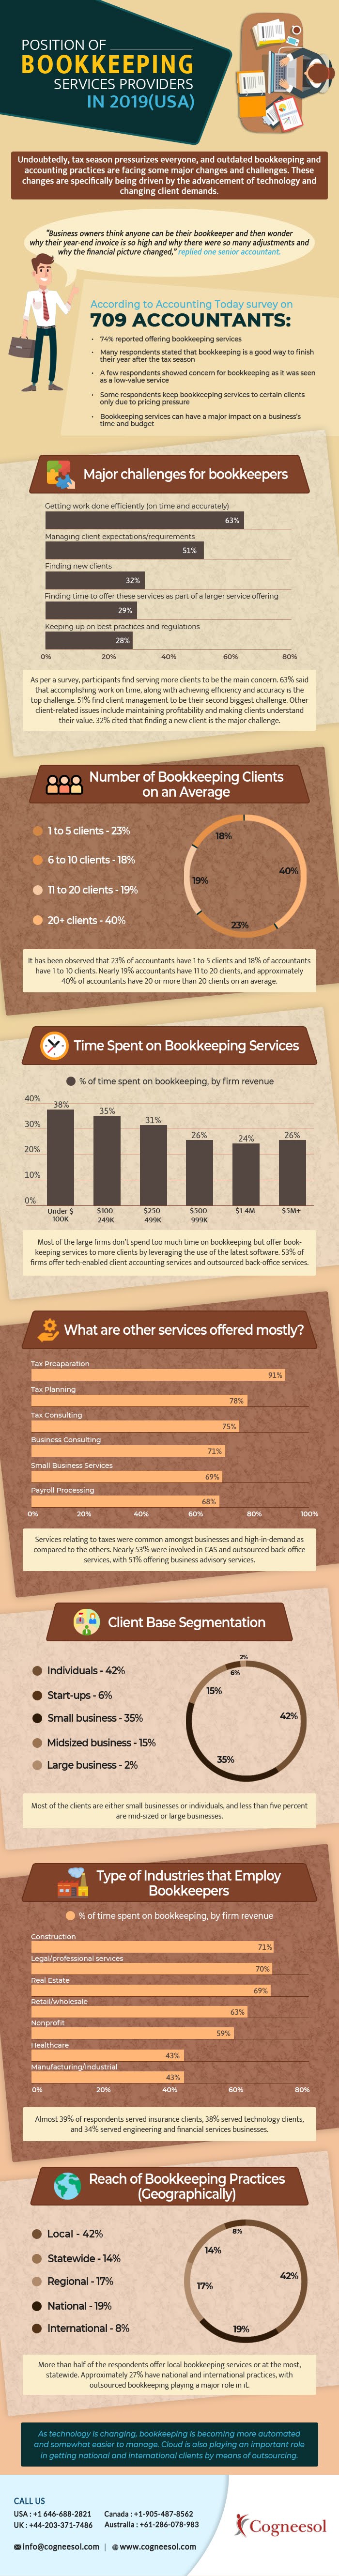 Position of Bookkeeping Services Providers in 2019 #infographic